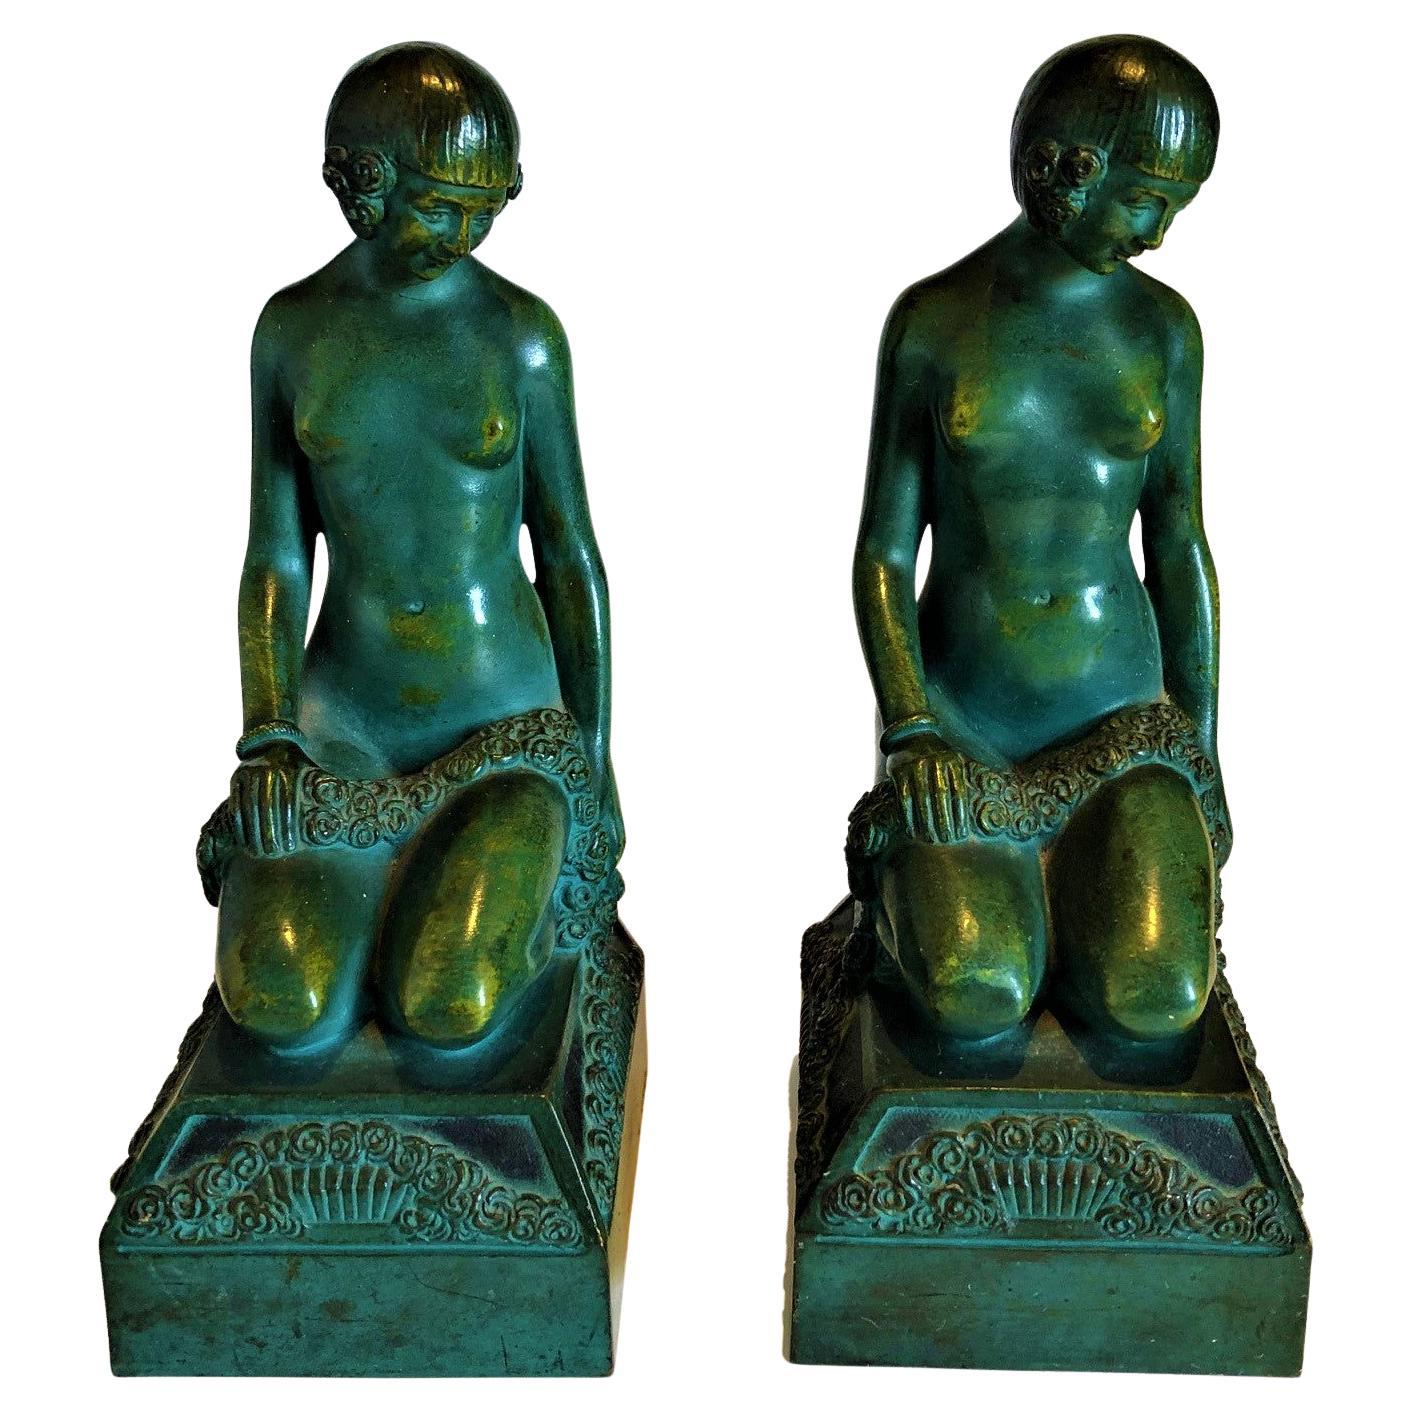 Art Deco Nude Erotic Woman Bronze Bookends, c. France 1925, Signed Scribe